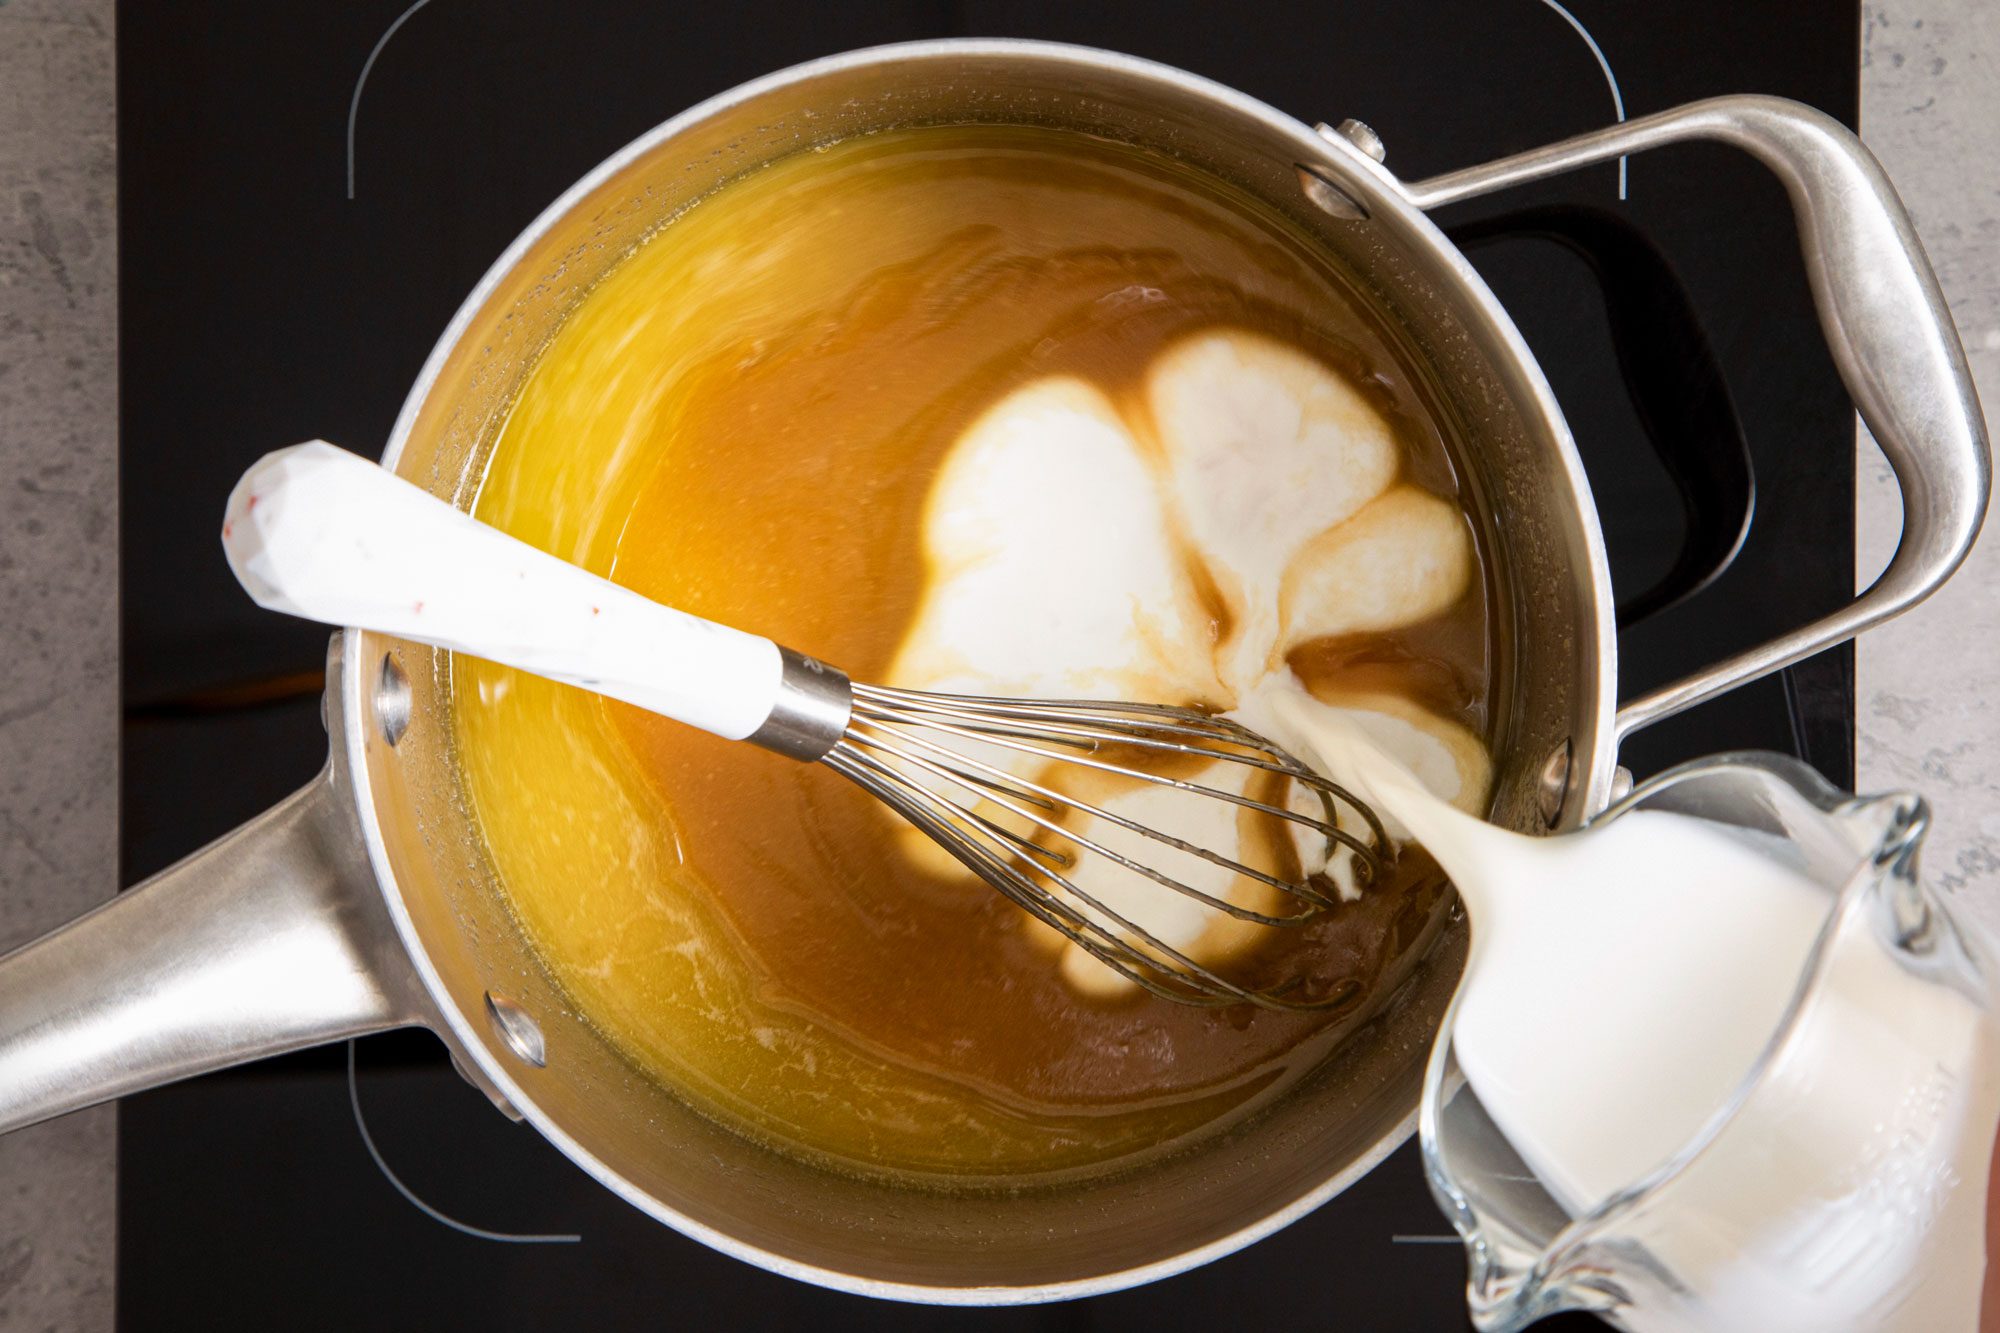 pouring cream into melted butter and brown sugar in a saucepan on induction cooktop